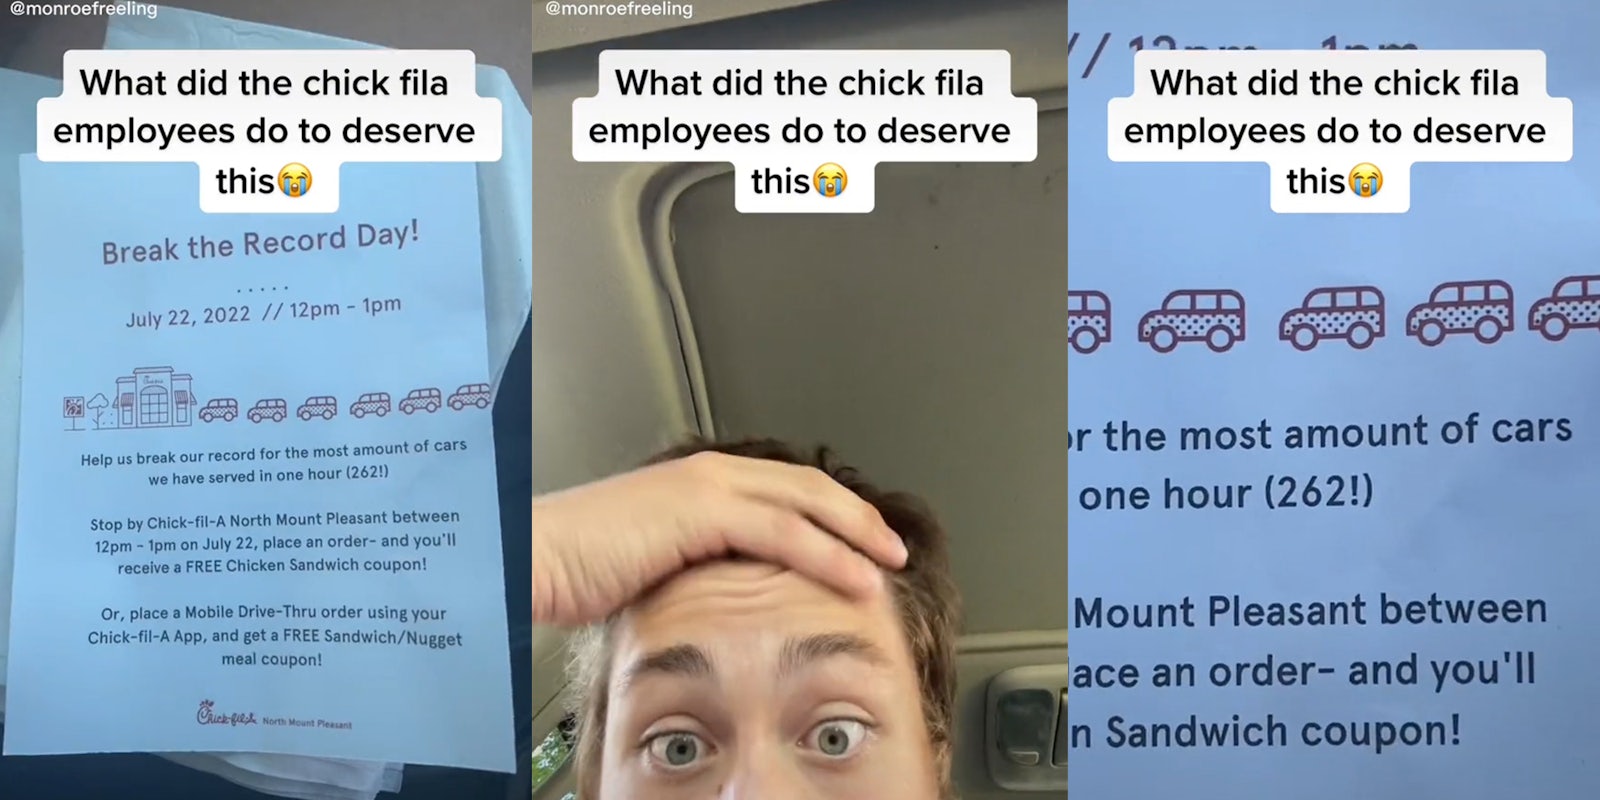 'Break the Record Day!' flyer from Chick-fil-A (l) man with hand on head in disbelief (c) close up of the flyer with 'the most amount of cars in one hour (262!)' (r) all with caption 'What did the chick fila employees do to deserve this'